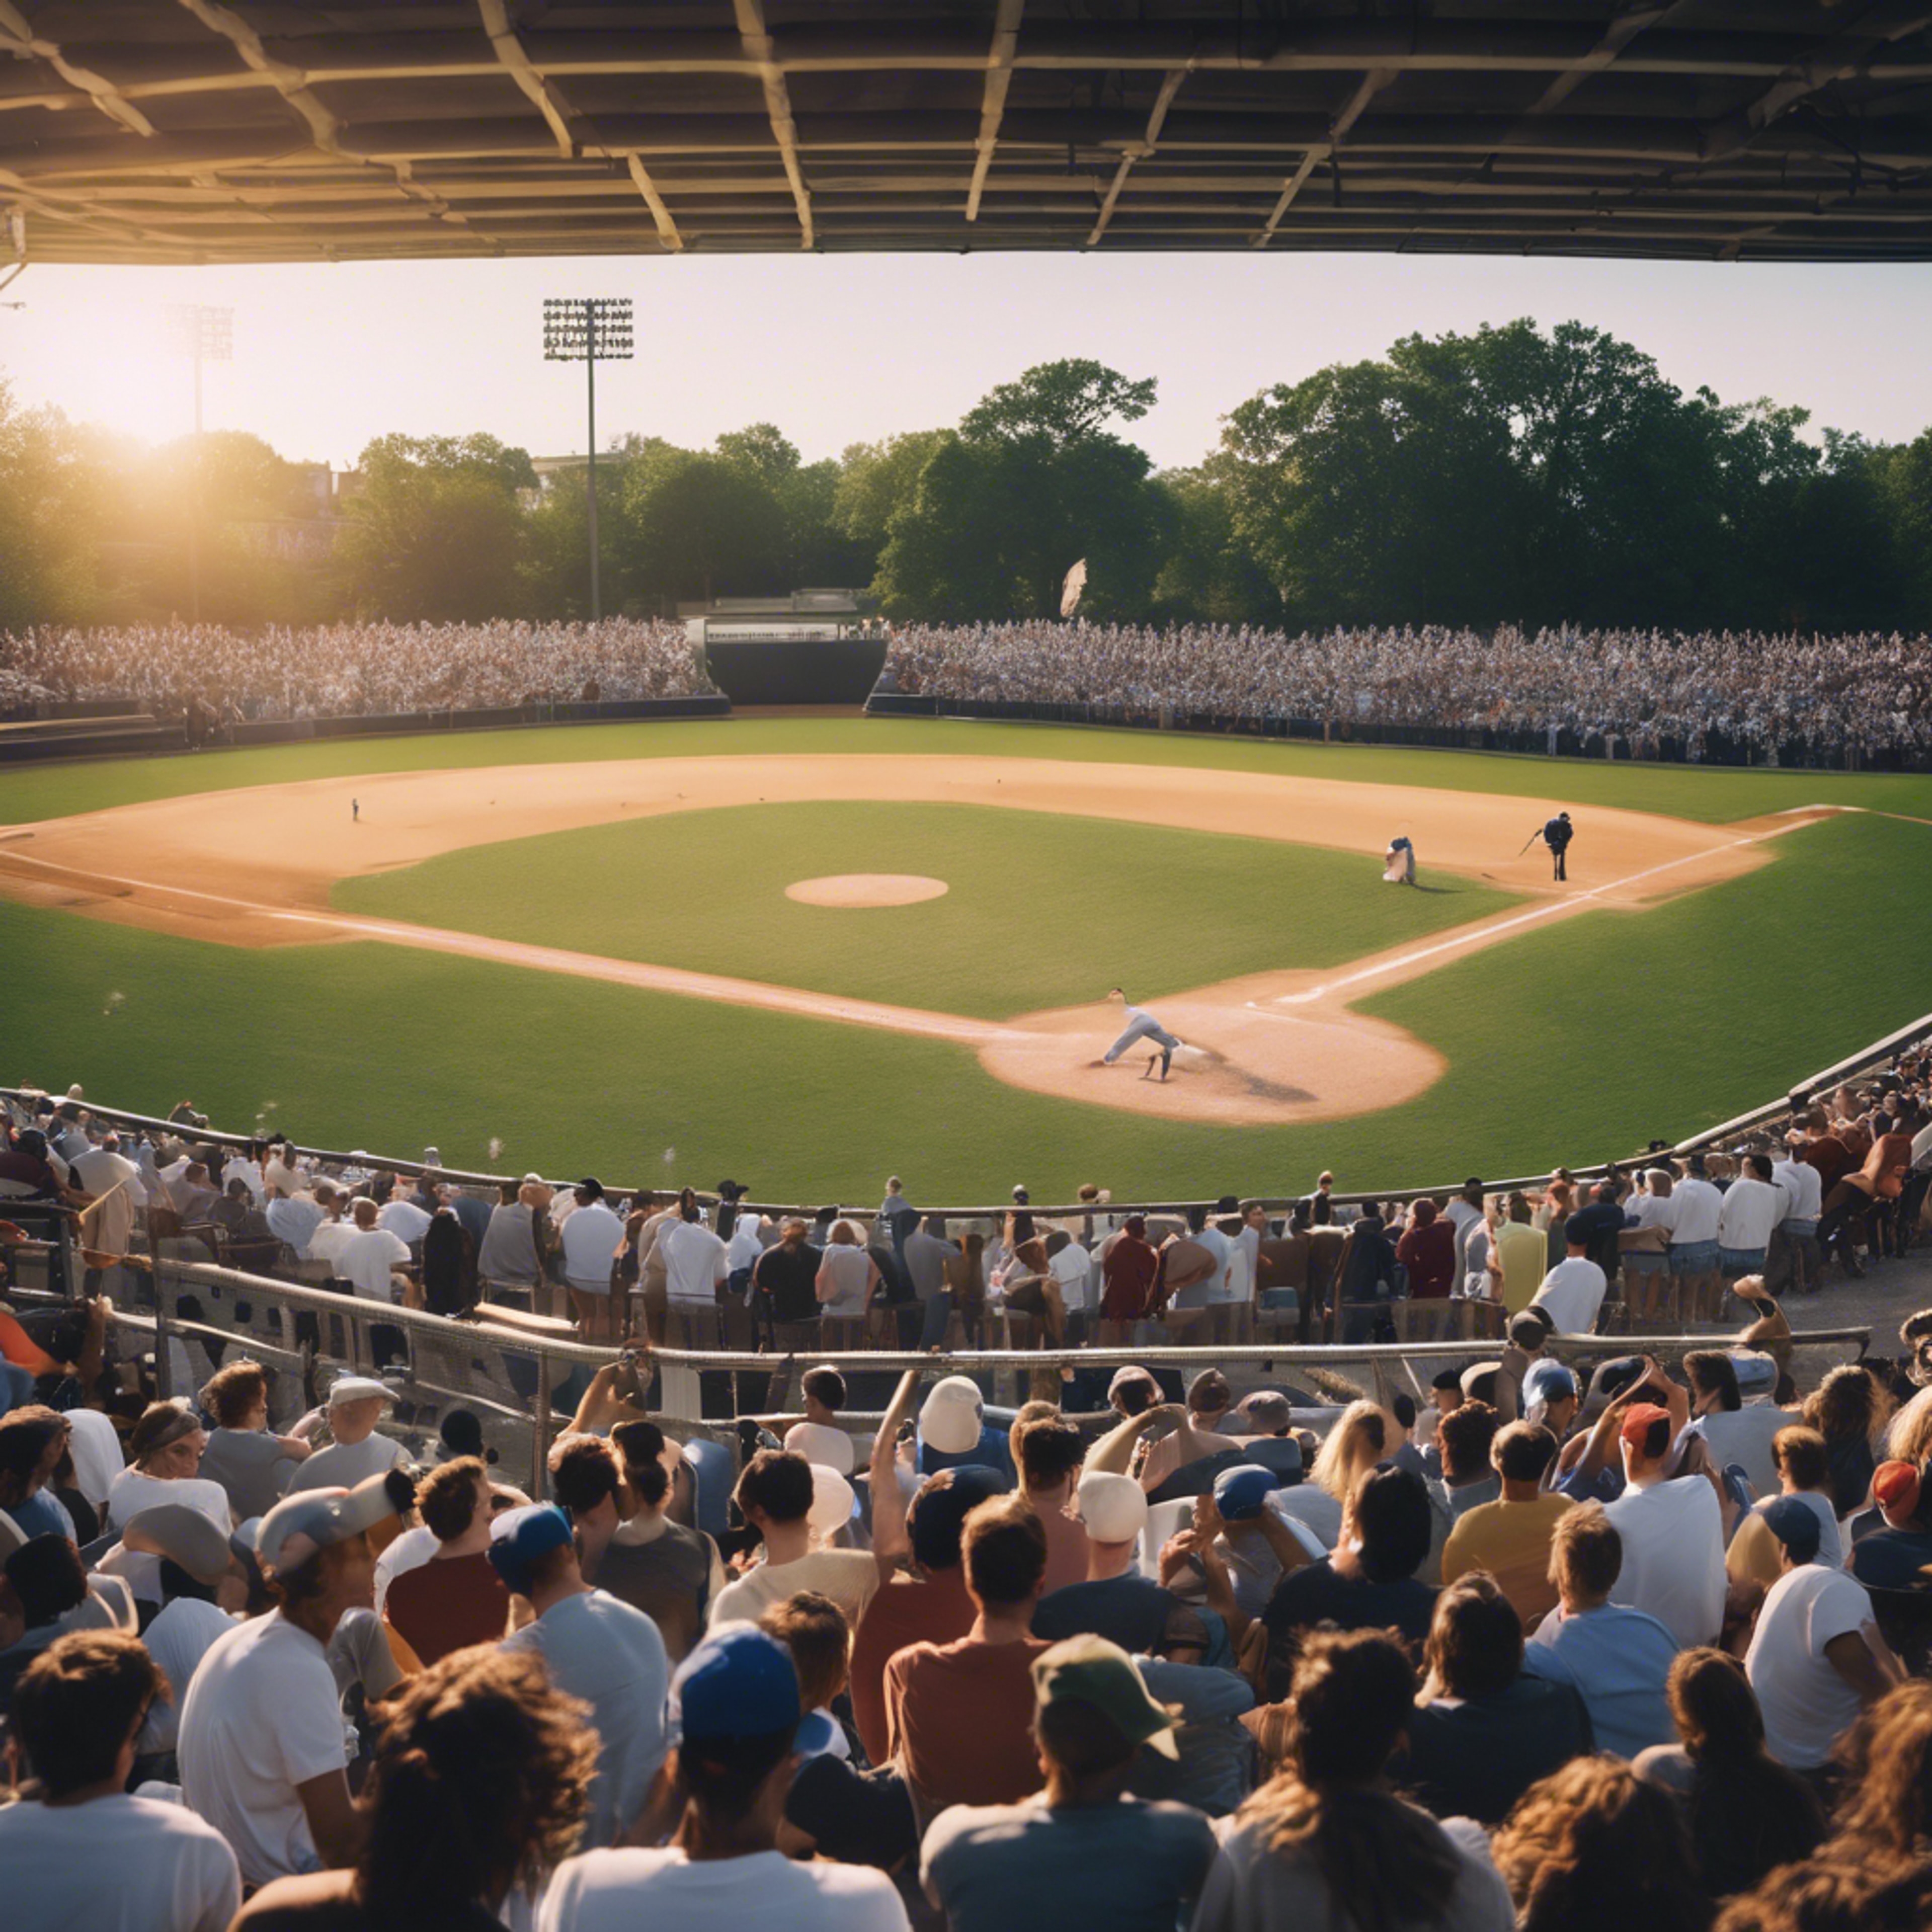 A college baseball field packed with excited students during a heated match. Wallpaper[777cc8ce6a444f42baa3]